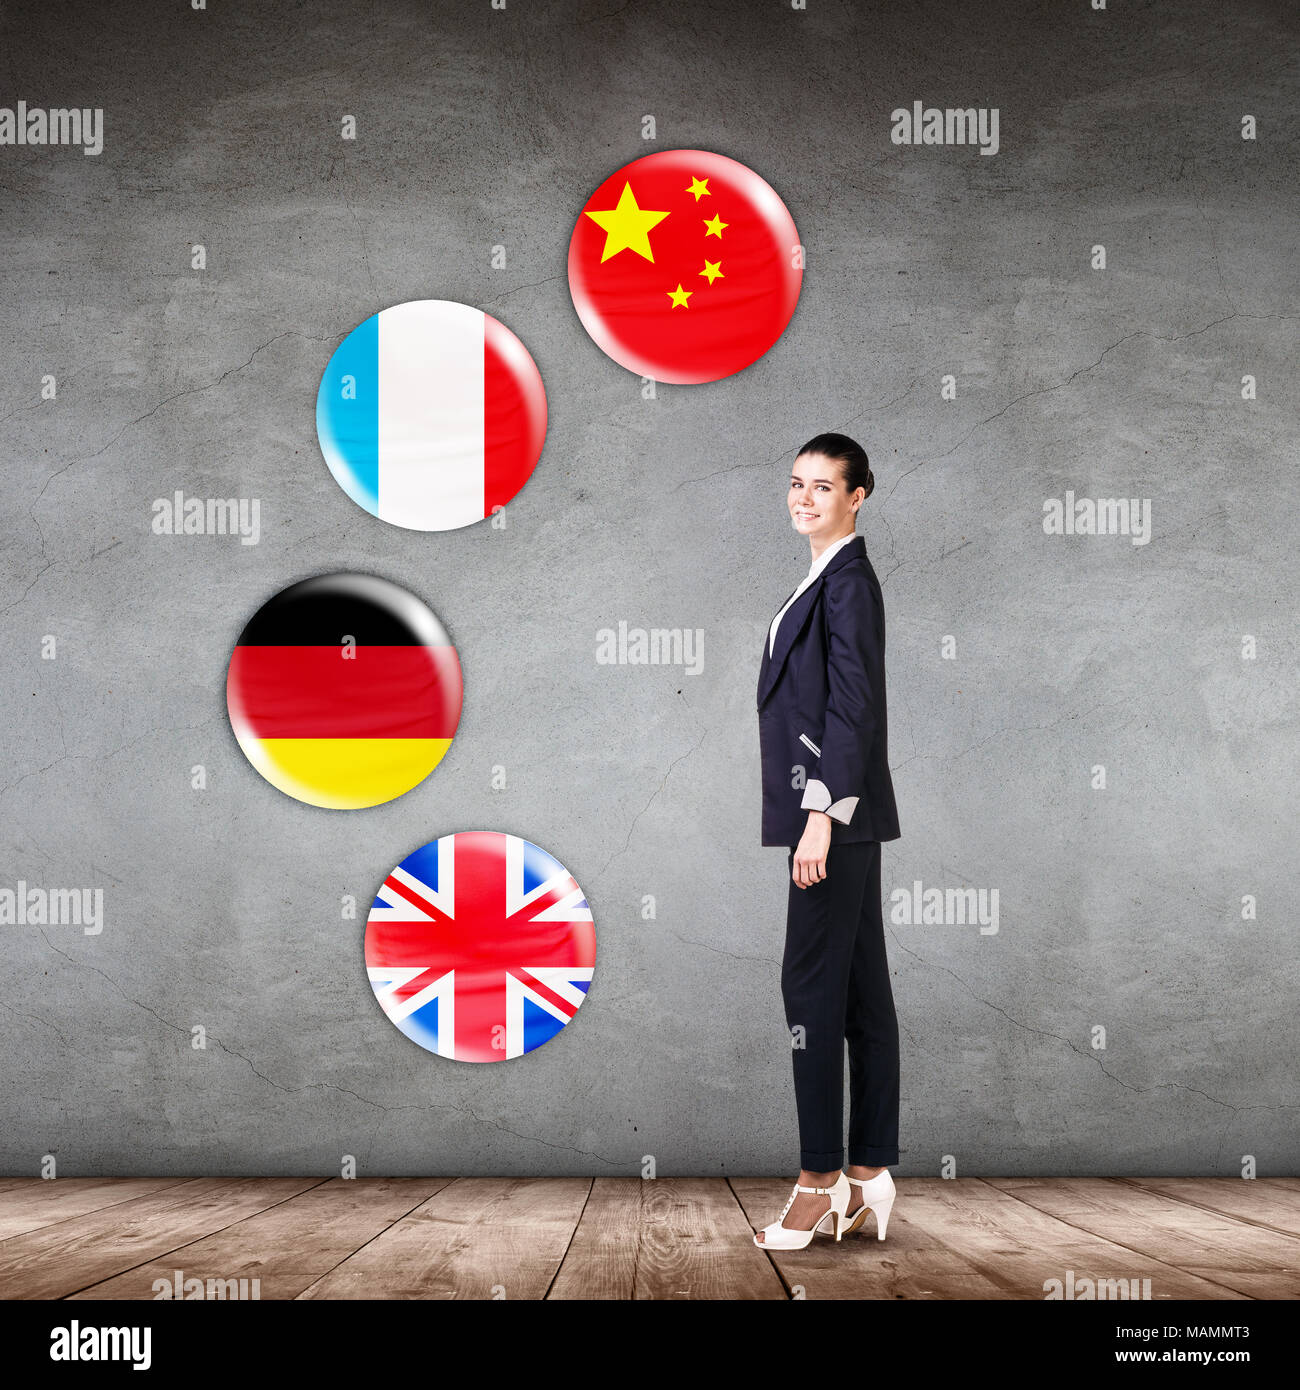 Business woman surrounded by dialogue bubbles with countries flags. Stock Photo